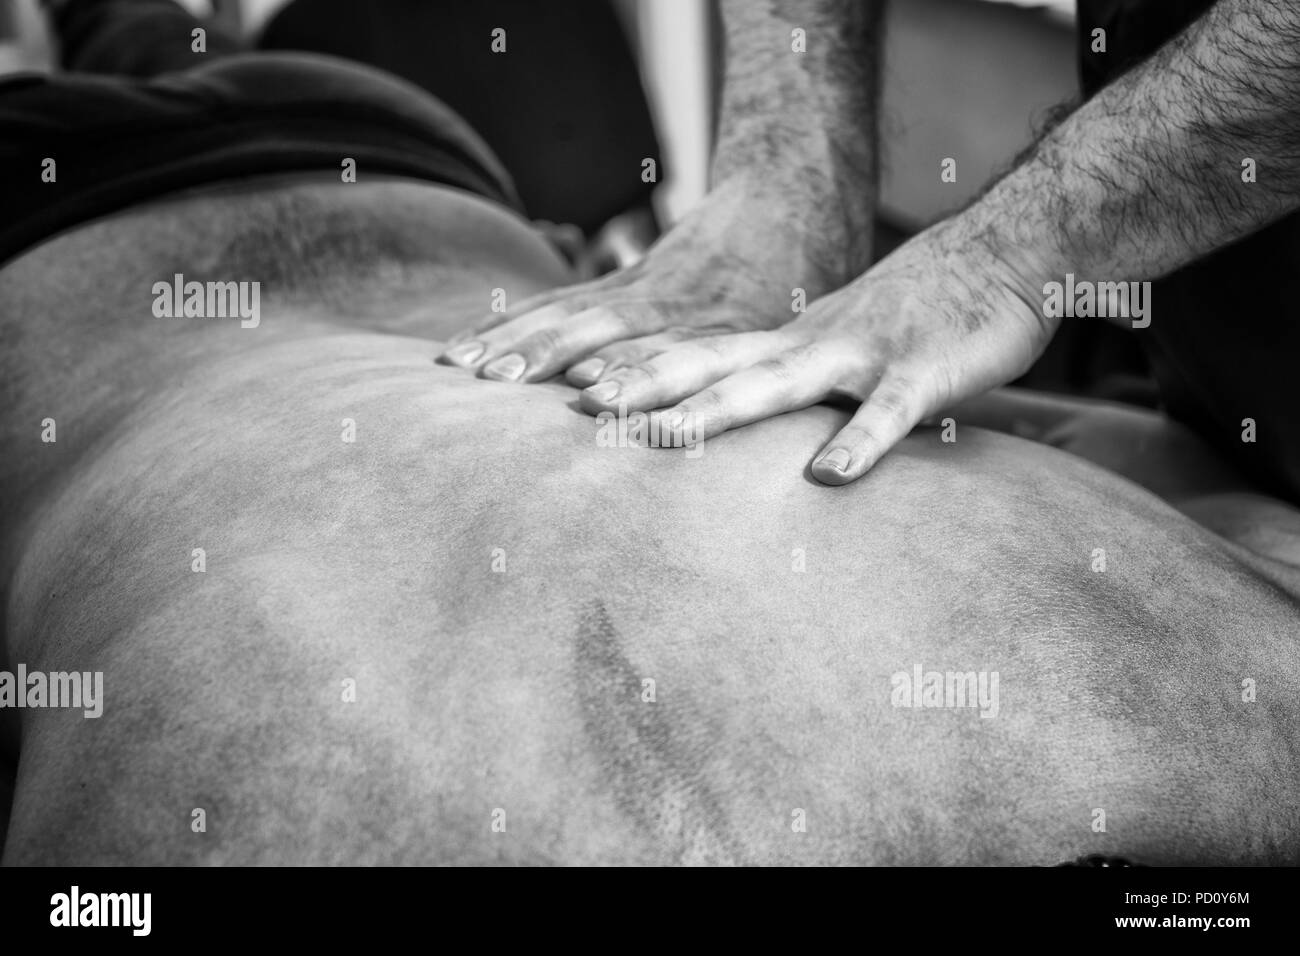 Black and White Close Up Detail of Male Massage Therapist Hands Giving Back Rub Down to Unidentifiable Male Client Lying on Stomach Stock Photo